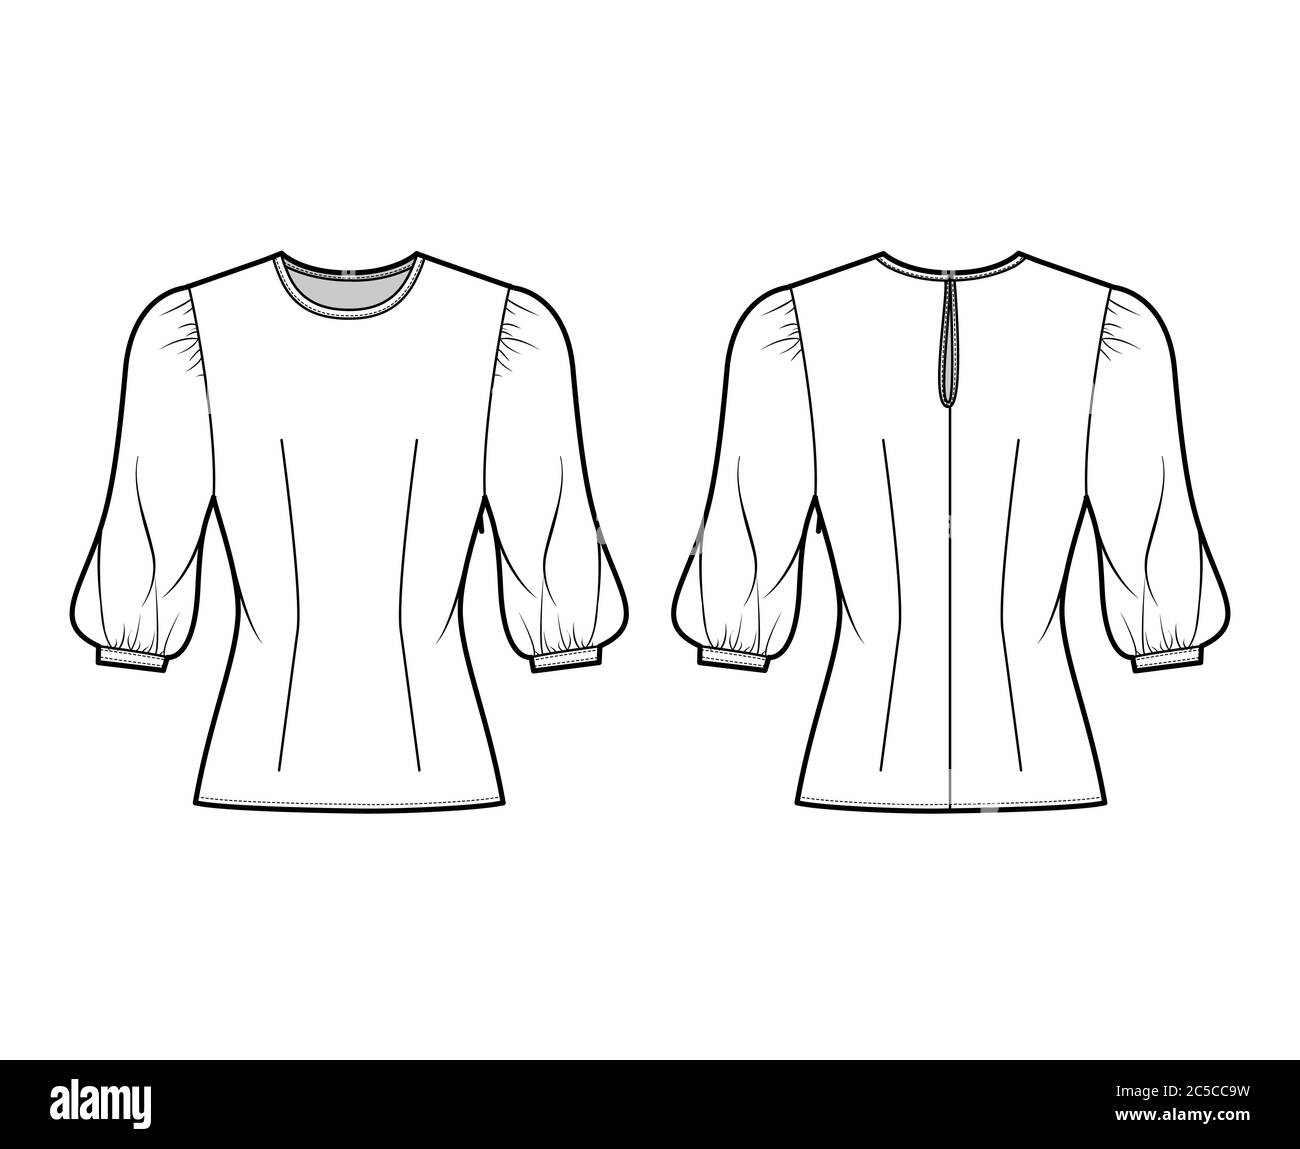 Blouse technical fashion illustration with round neckline, puffy mutton sleeves, fitted body. Flat apparel template front, back white color. Women, men unisex CAD garment designer mockup Stock Vector